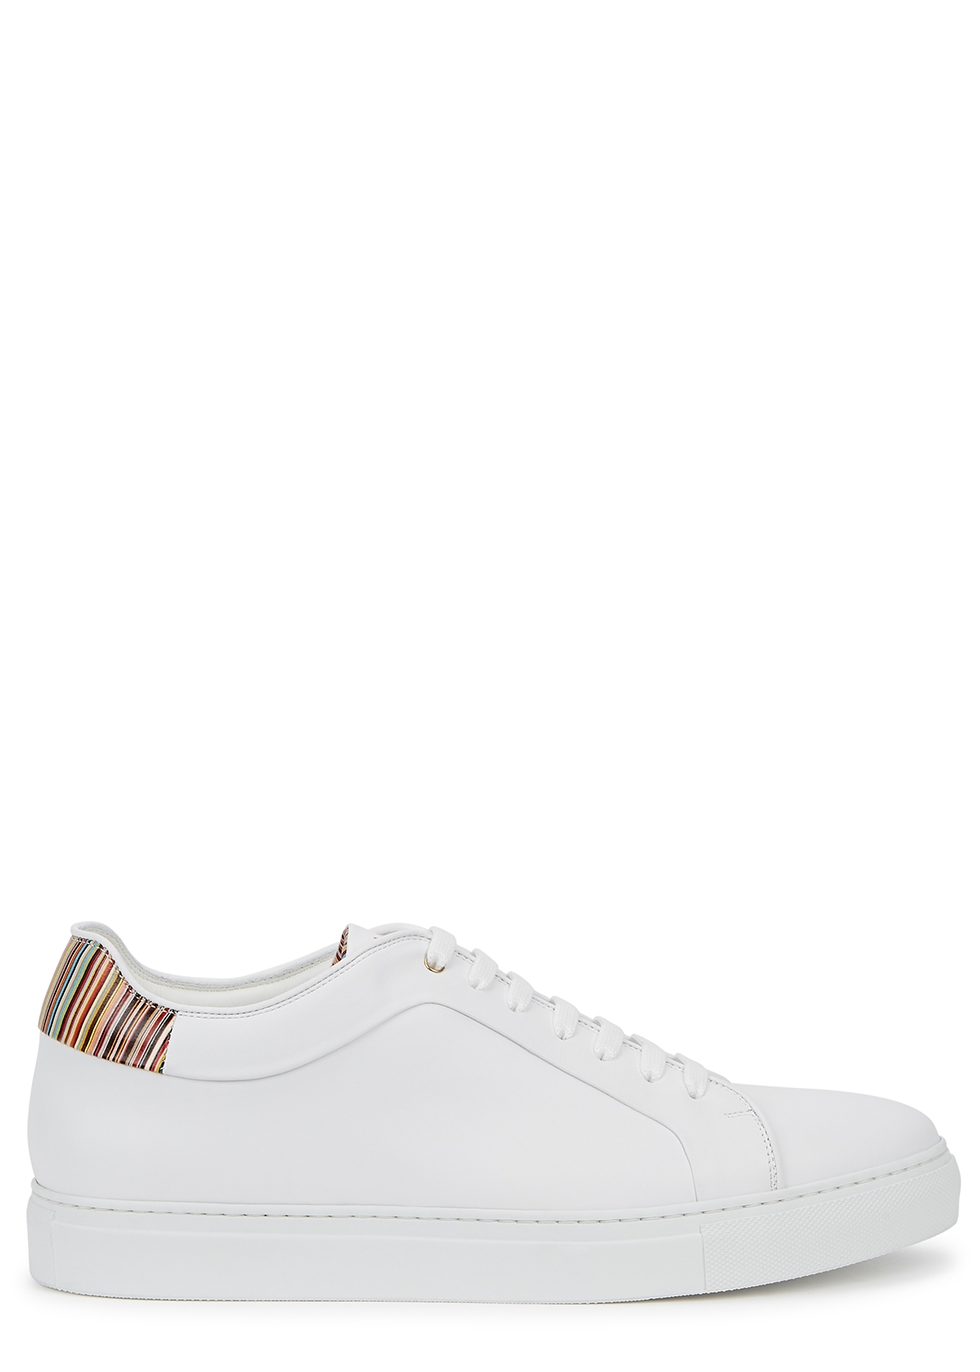 Paul Smith Basso white leather sneakers 